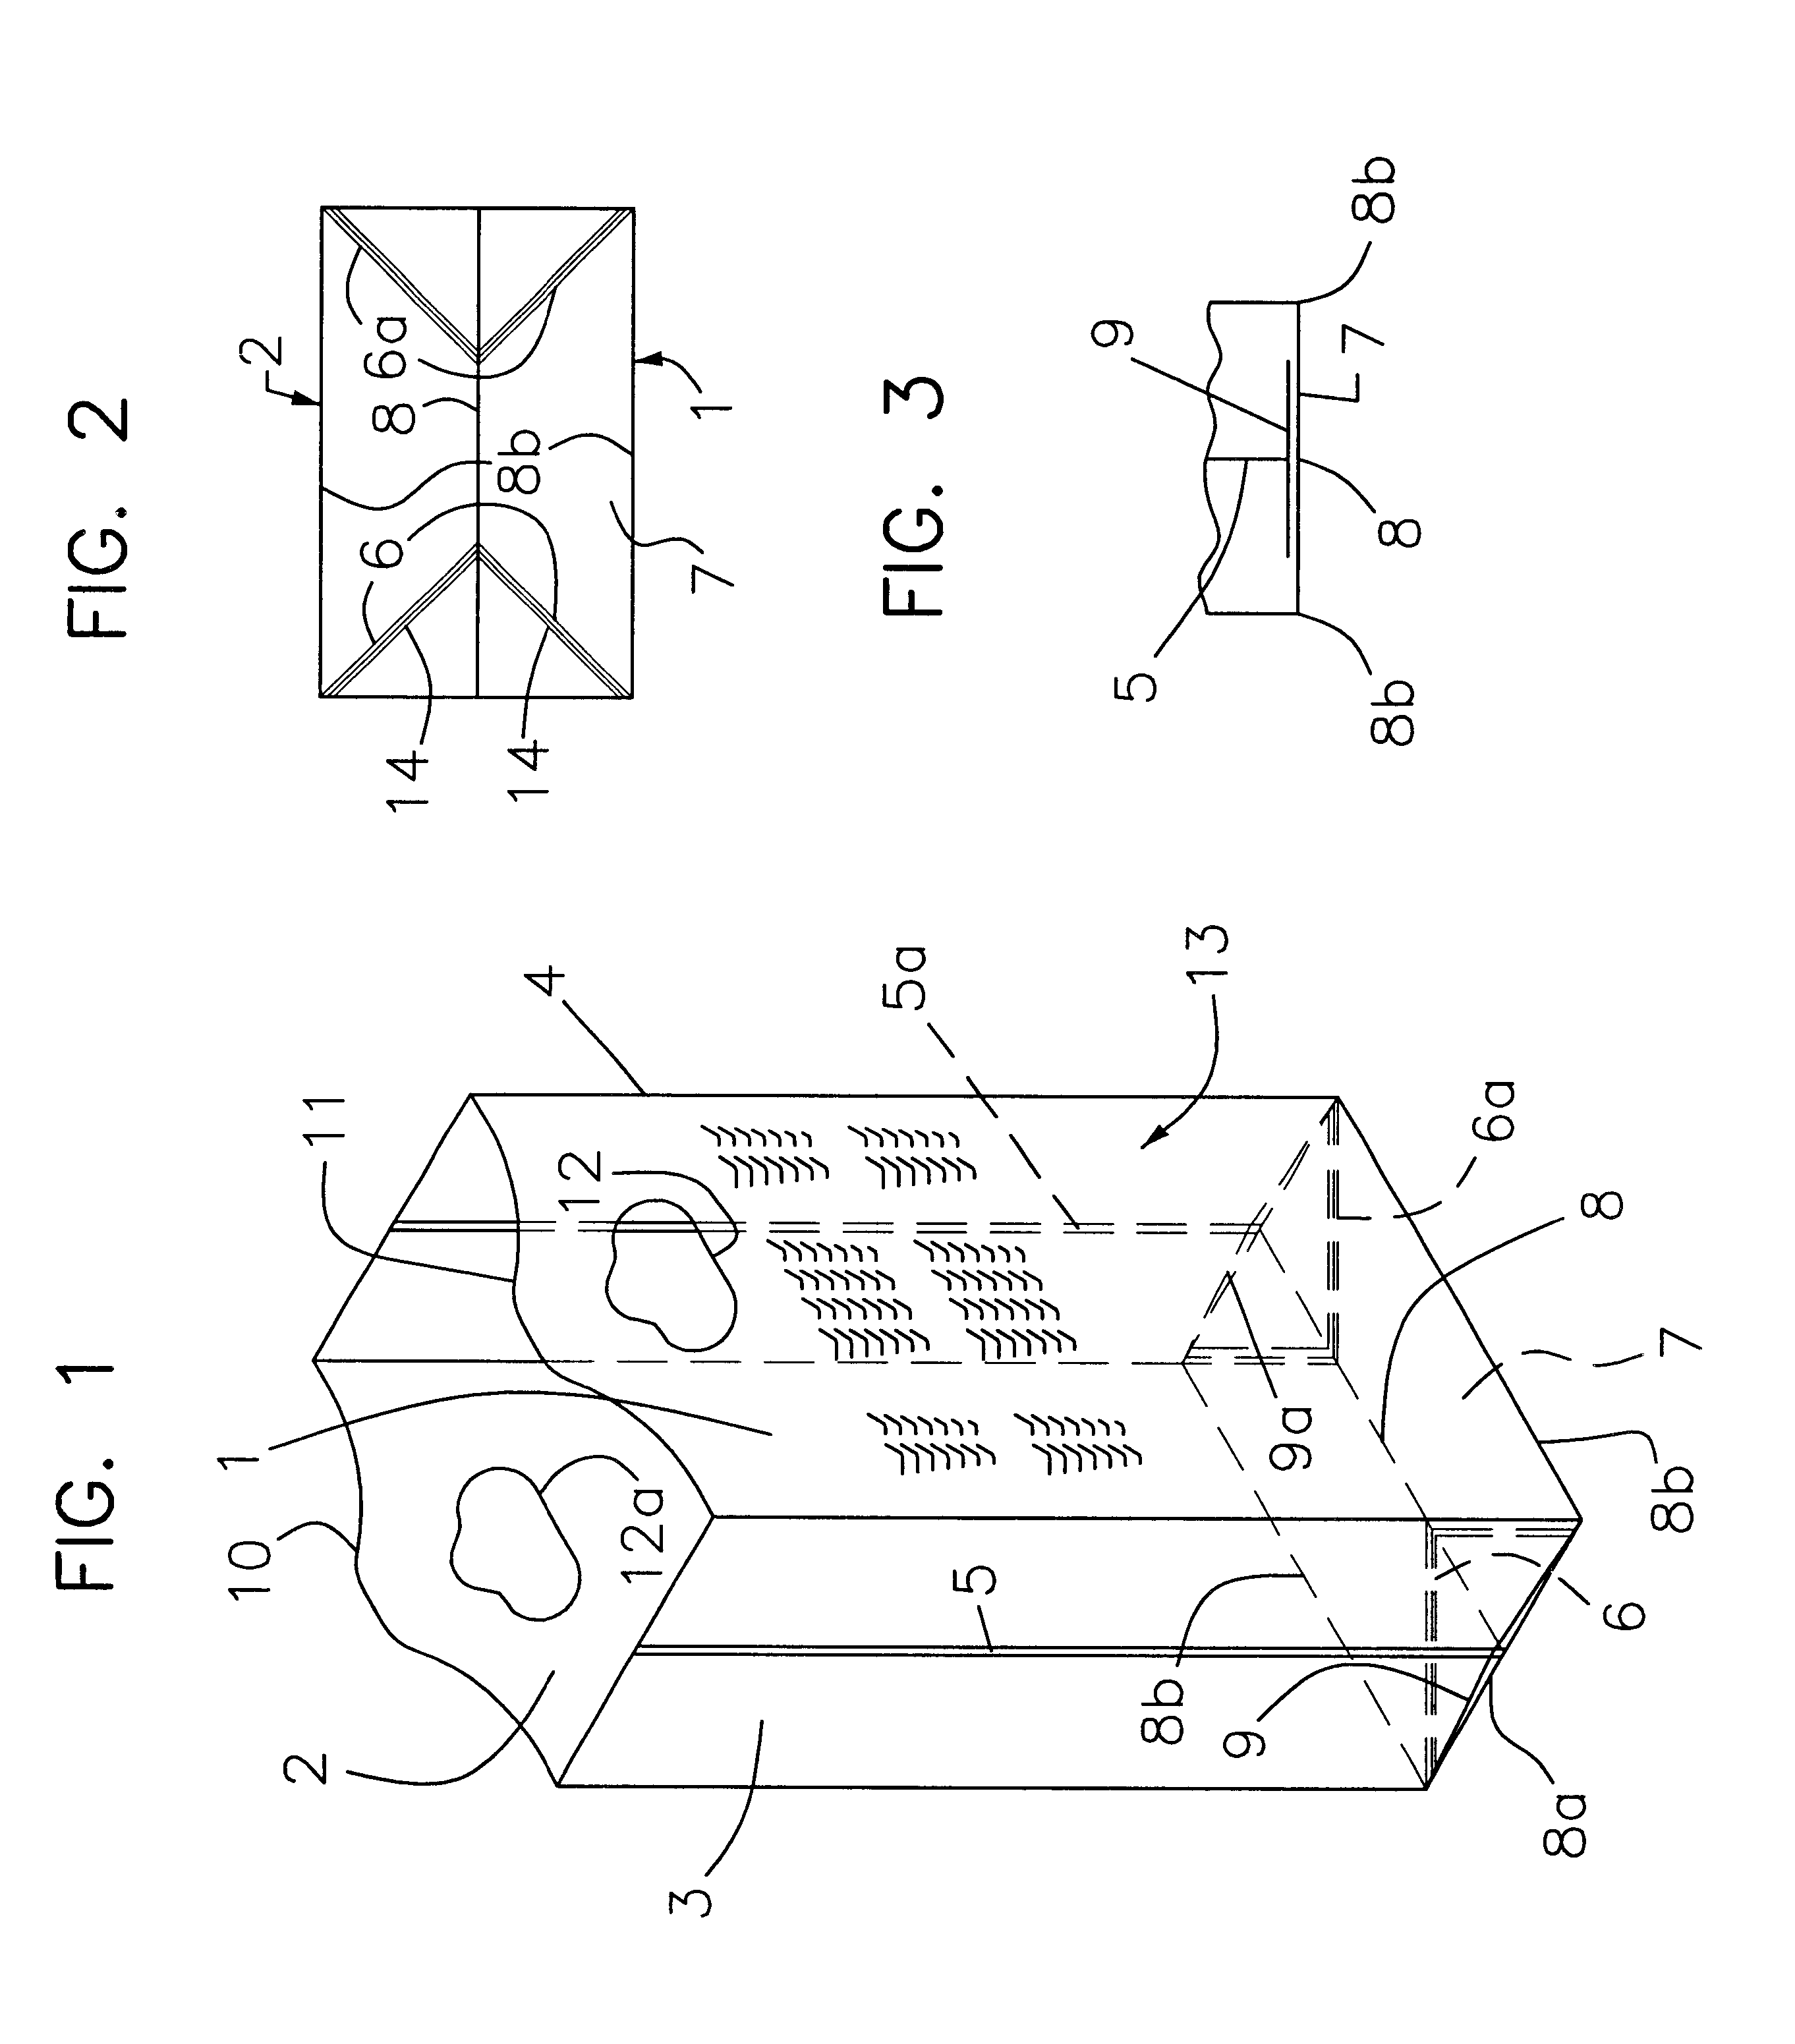 Apparatus for manufacture of a plastic bag with standup bottom wall